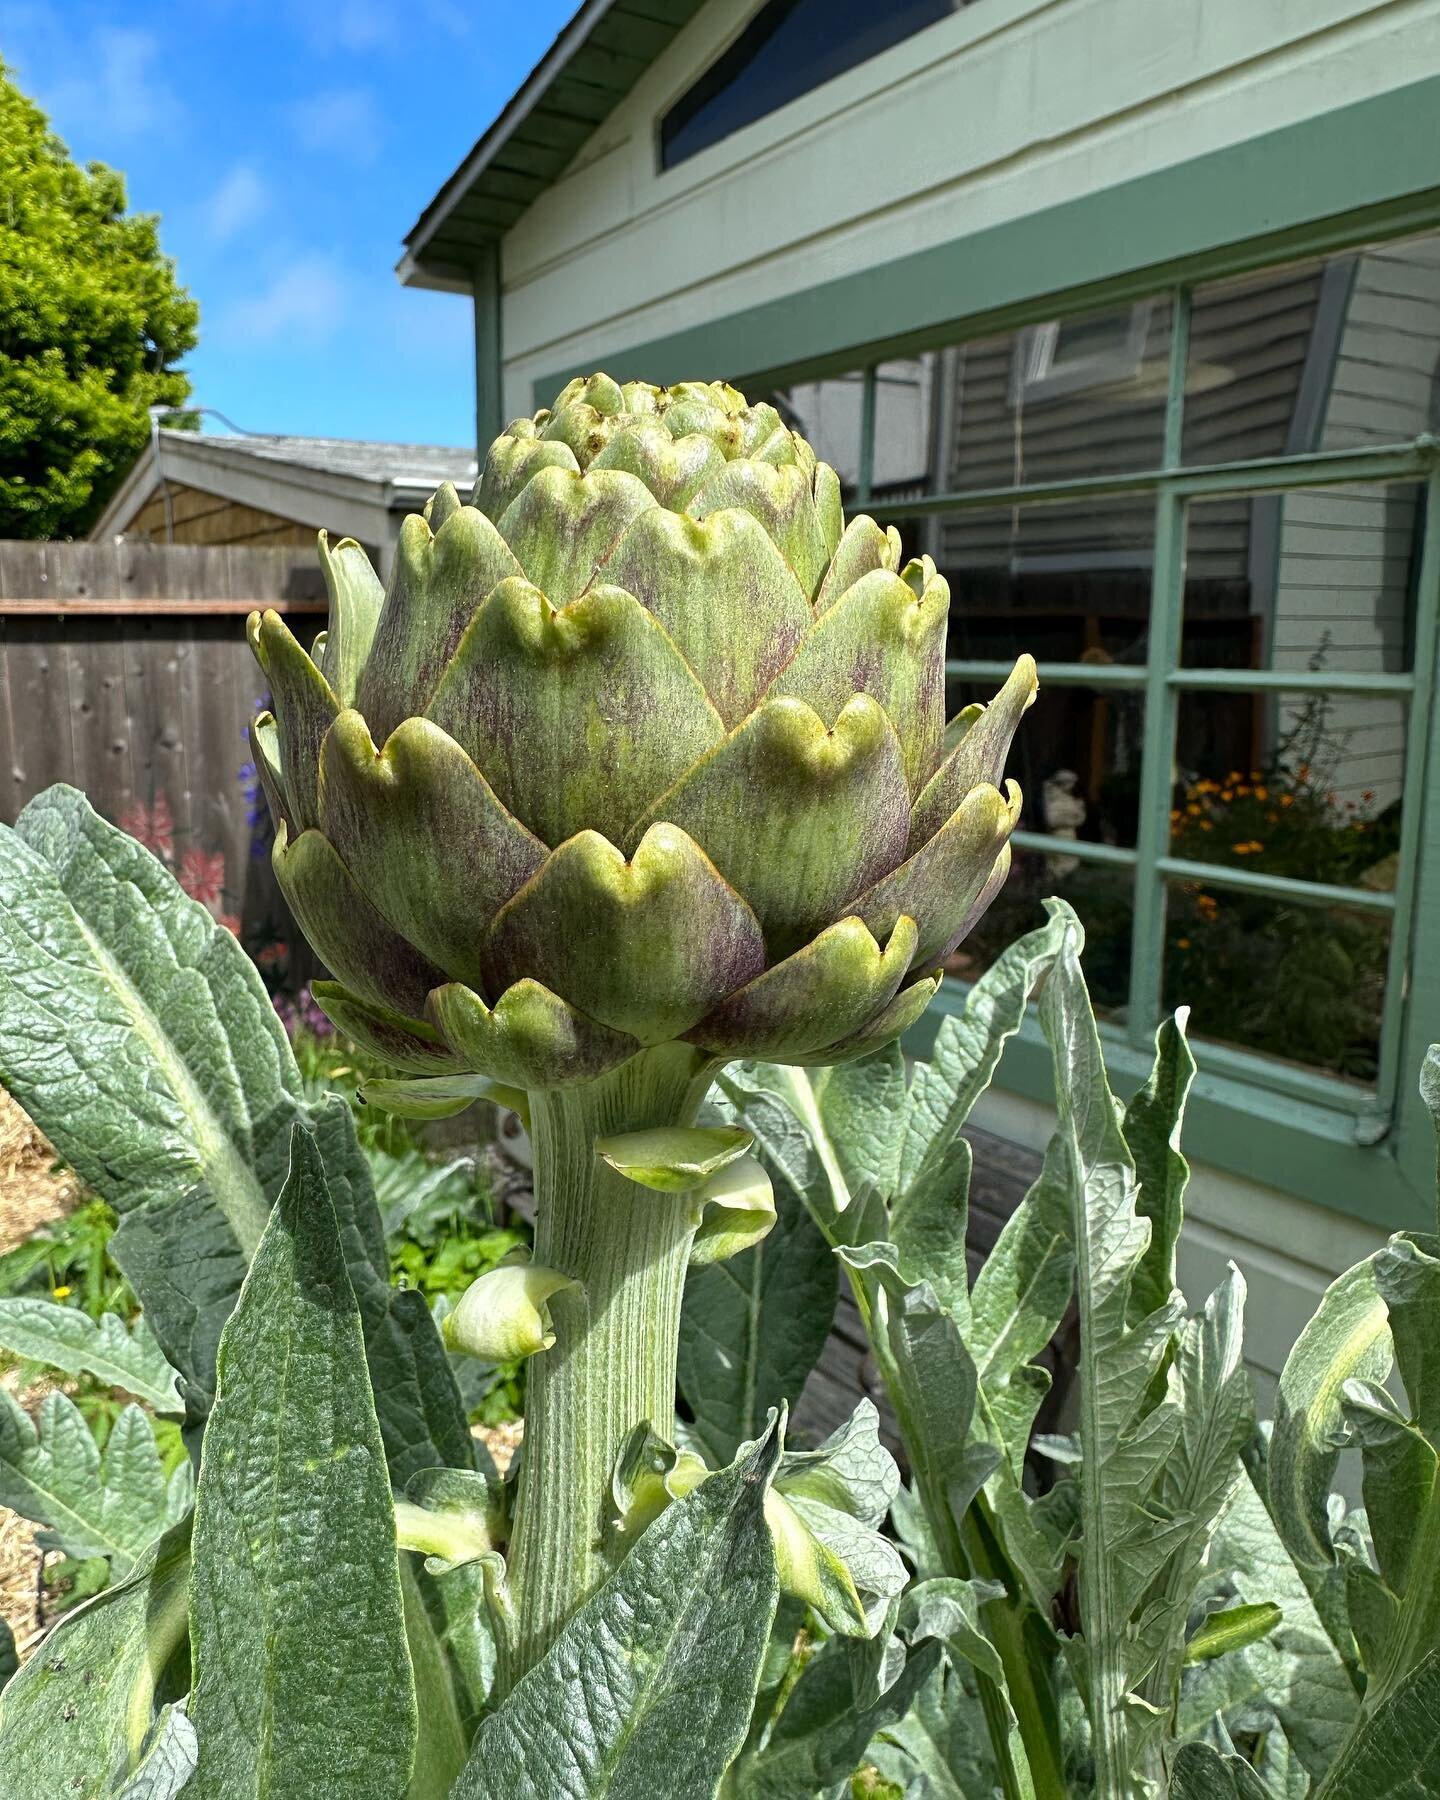 It&rsquo;s artichoke season in our garden! This is a perennial plant that we&rsquo;ve had for years. It&rsquo;s been knocked over by storms, survived the construction project, and yet, it persists! I love steaming them and pairing it with a spicy yog